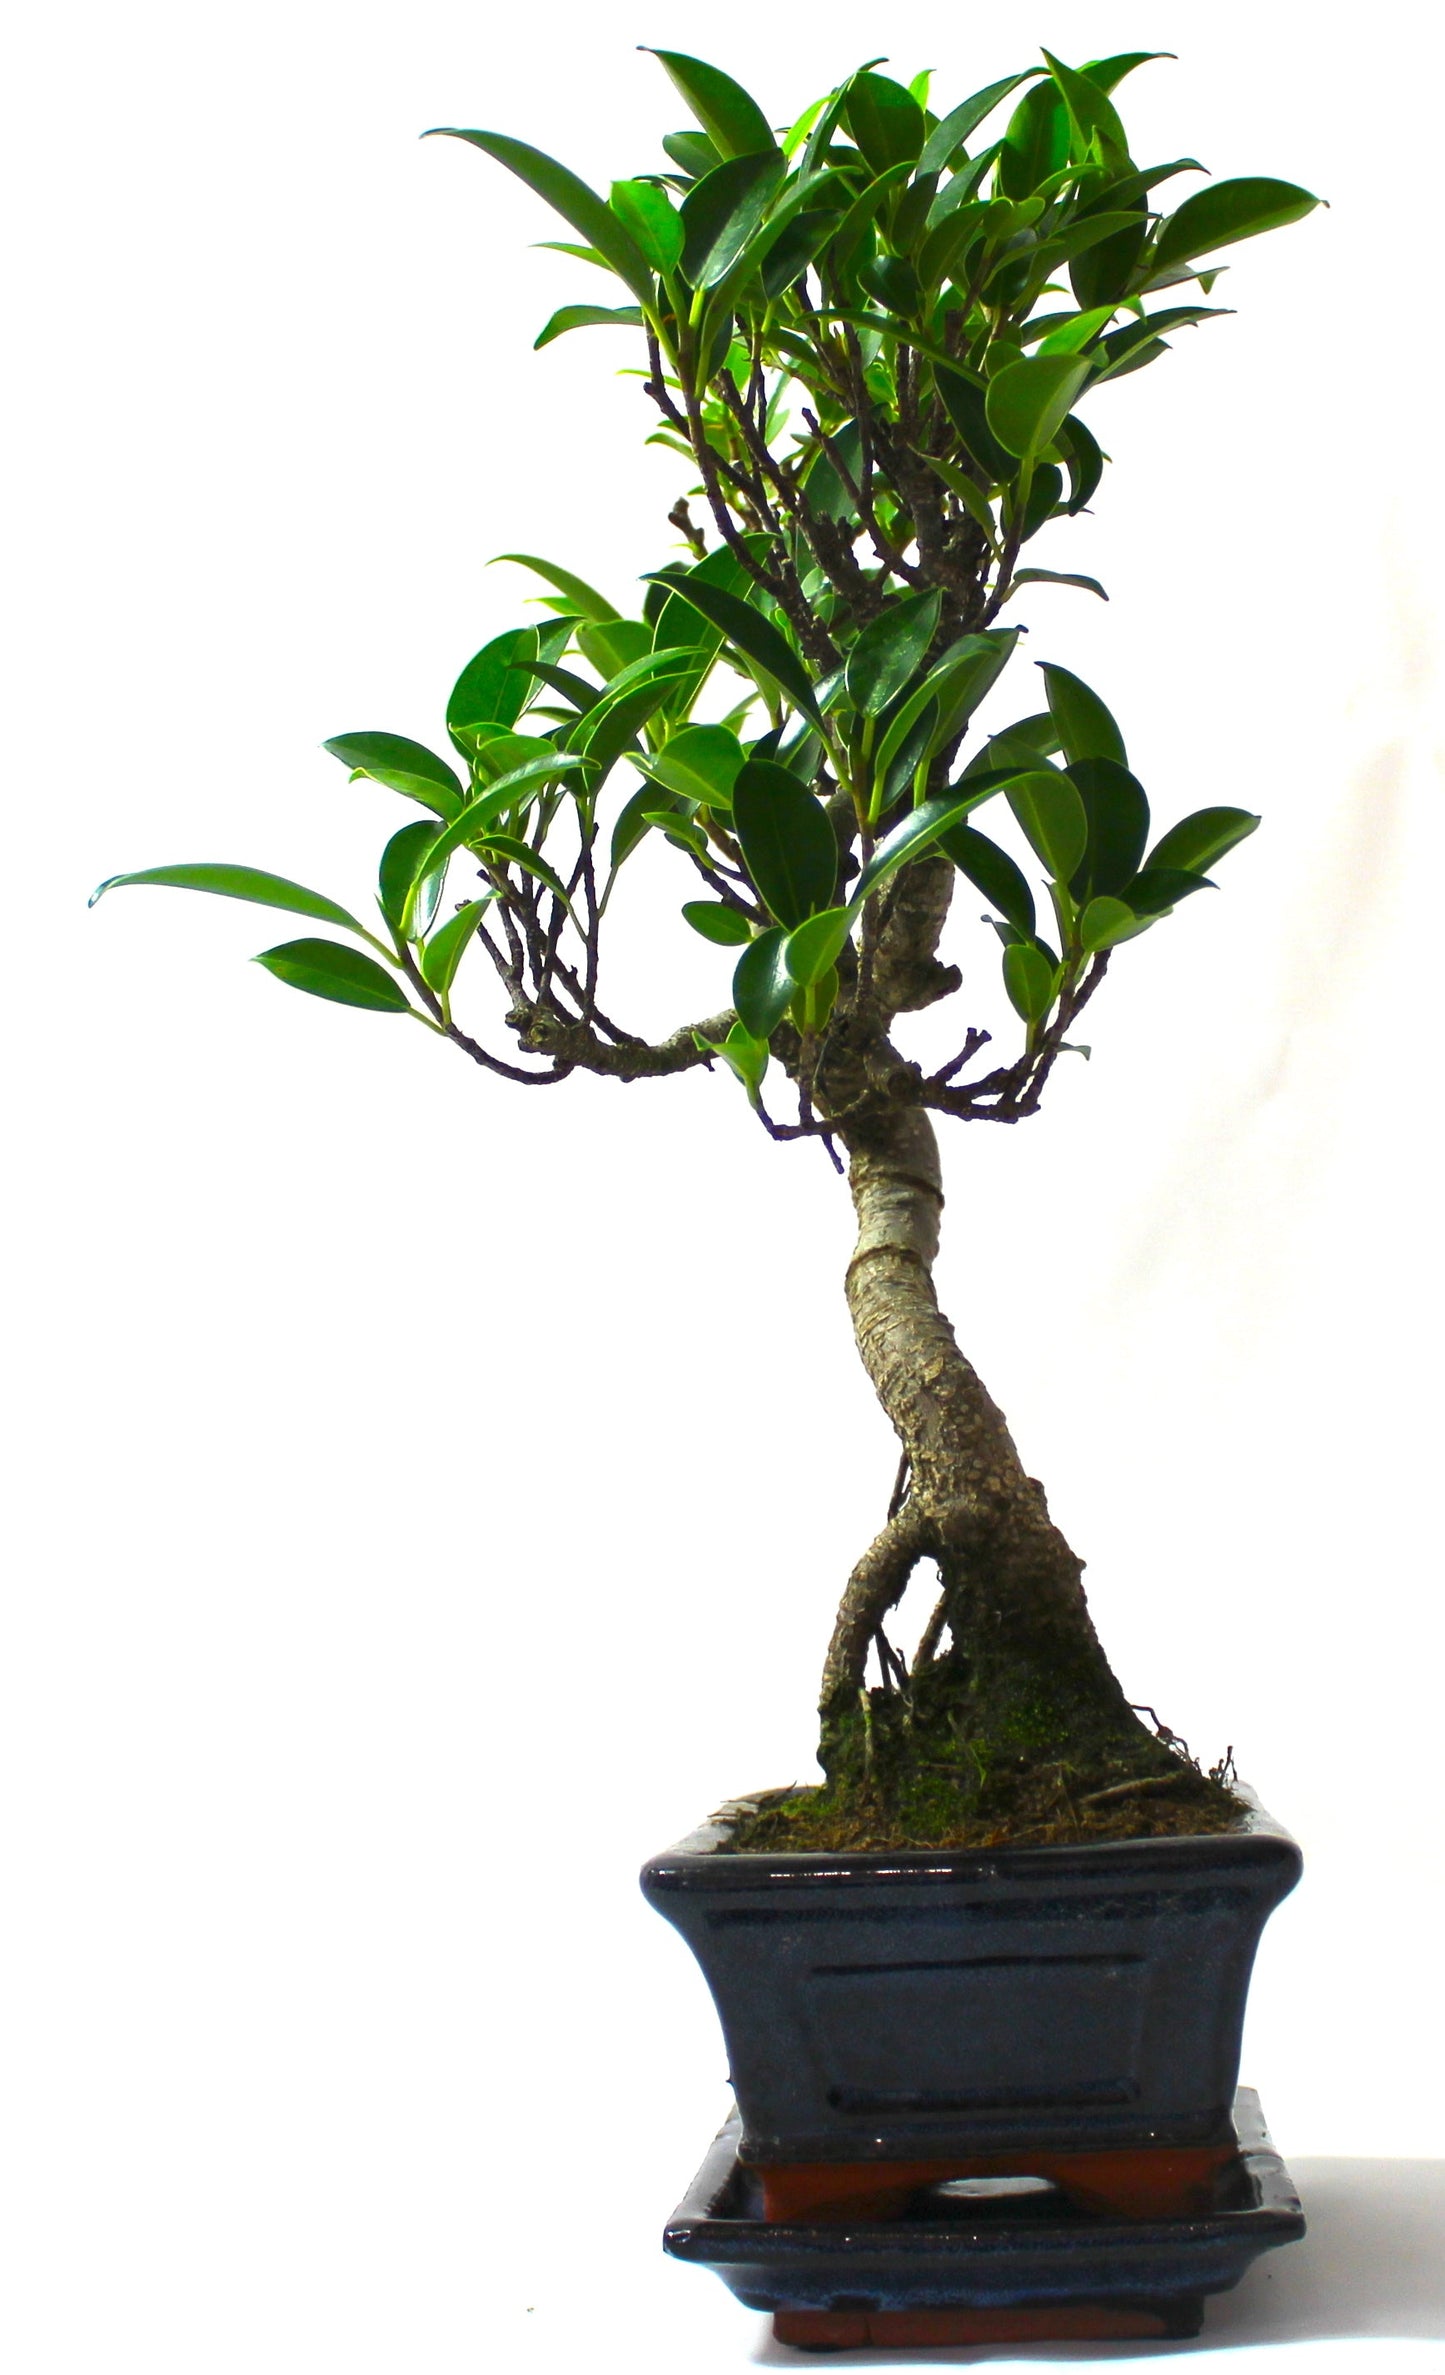 Ficus Retusa (Fig) Bonsai Tree S trunk - supplied with Care set and drip tray.